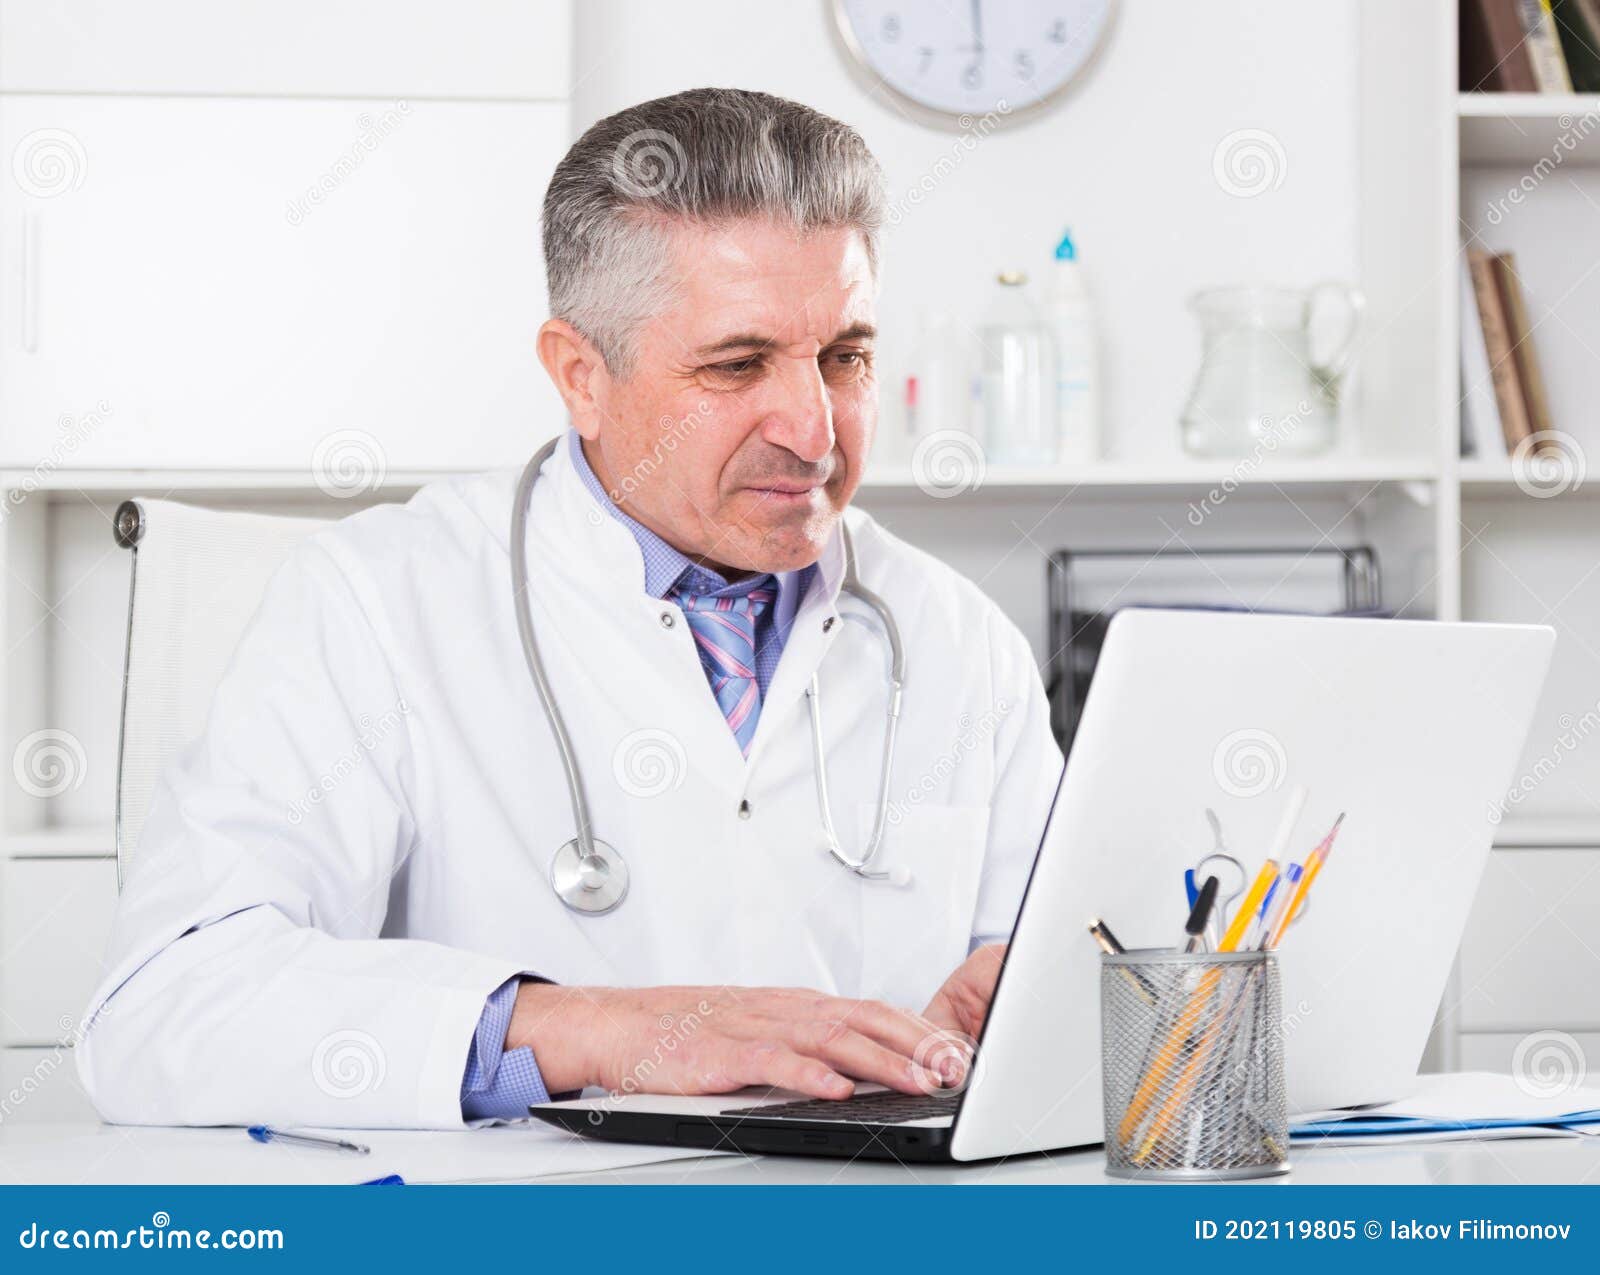 Mature Doctor in His Office Stock Image - Image of look, health: 202119805